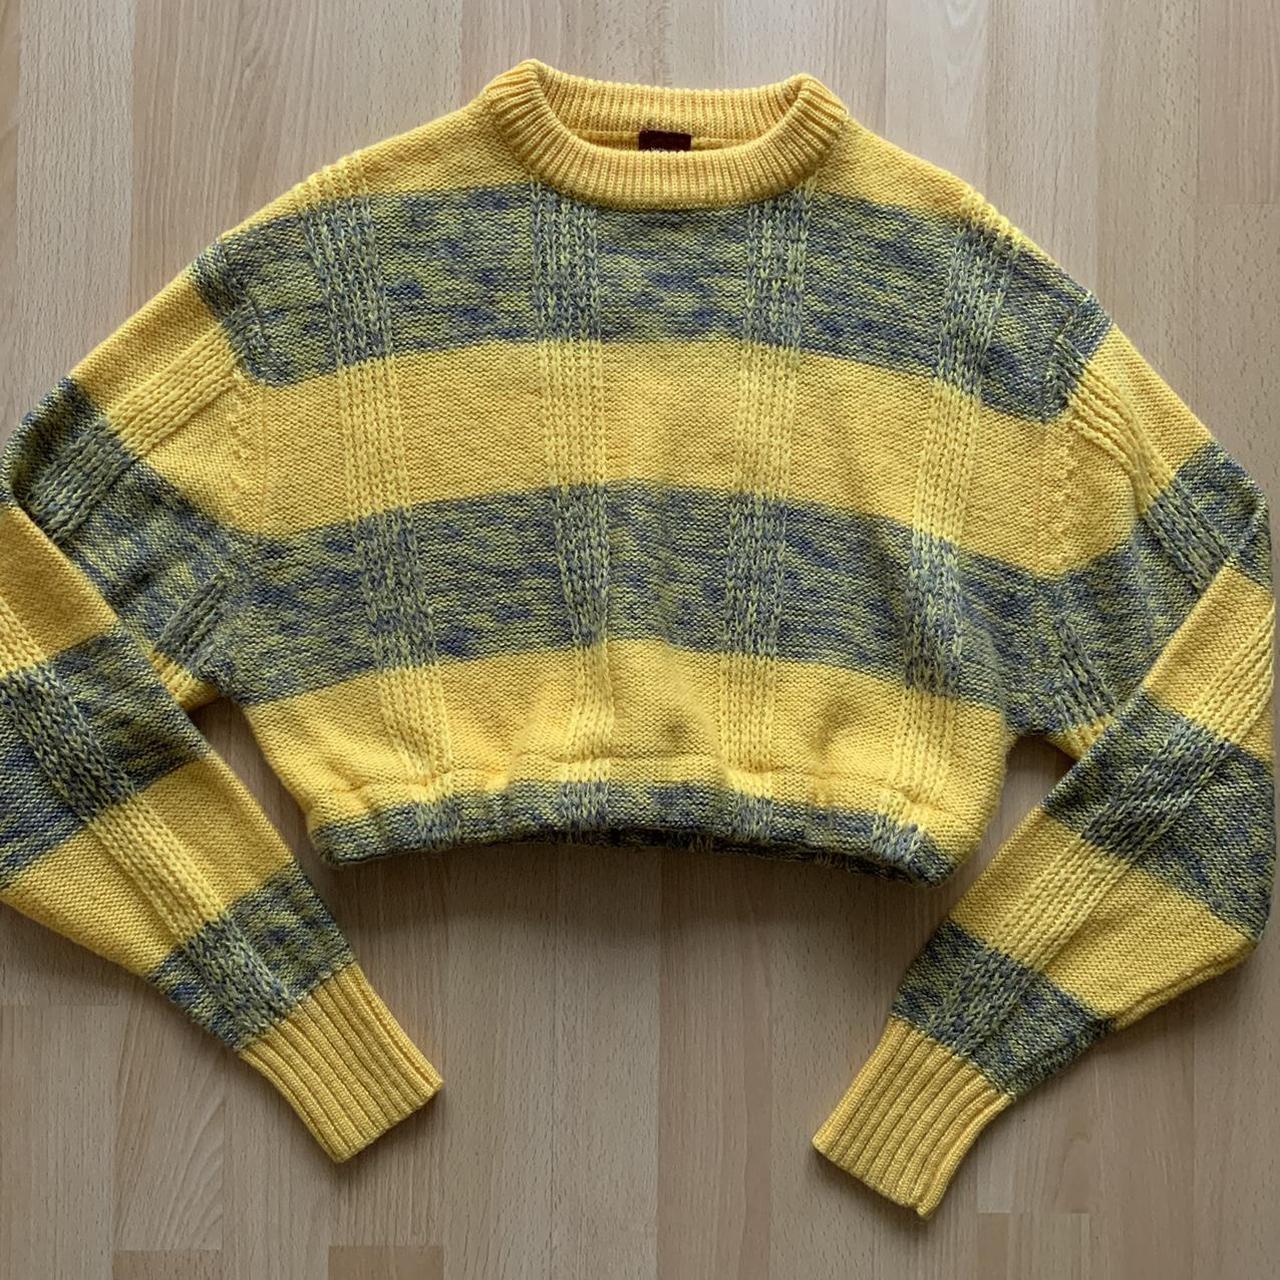 Product Image 2 - Adorable yellow striped sweater reworked